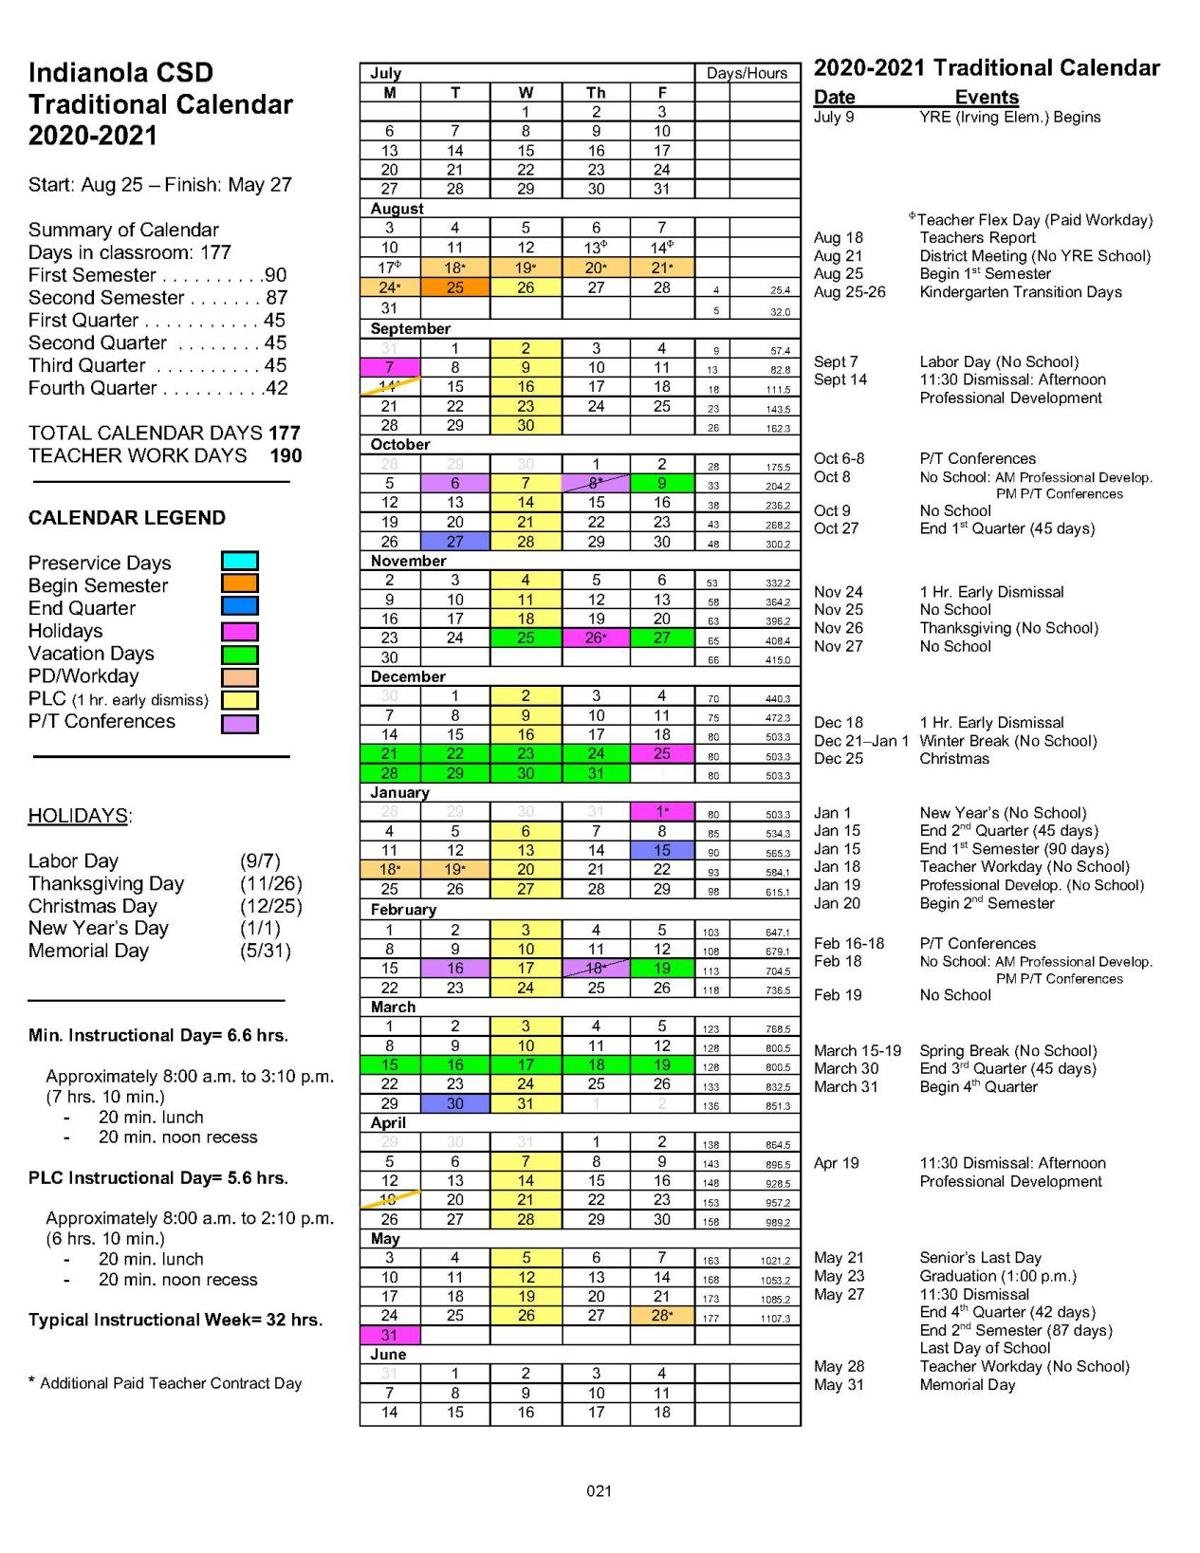 Indianola CSD revamps traditional calendar for 202021 school year